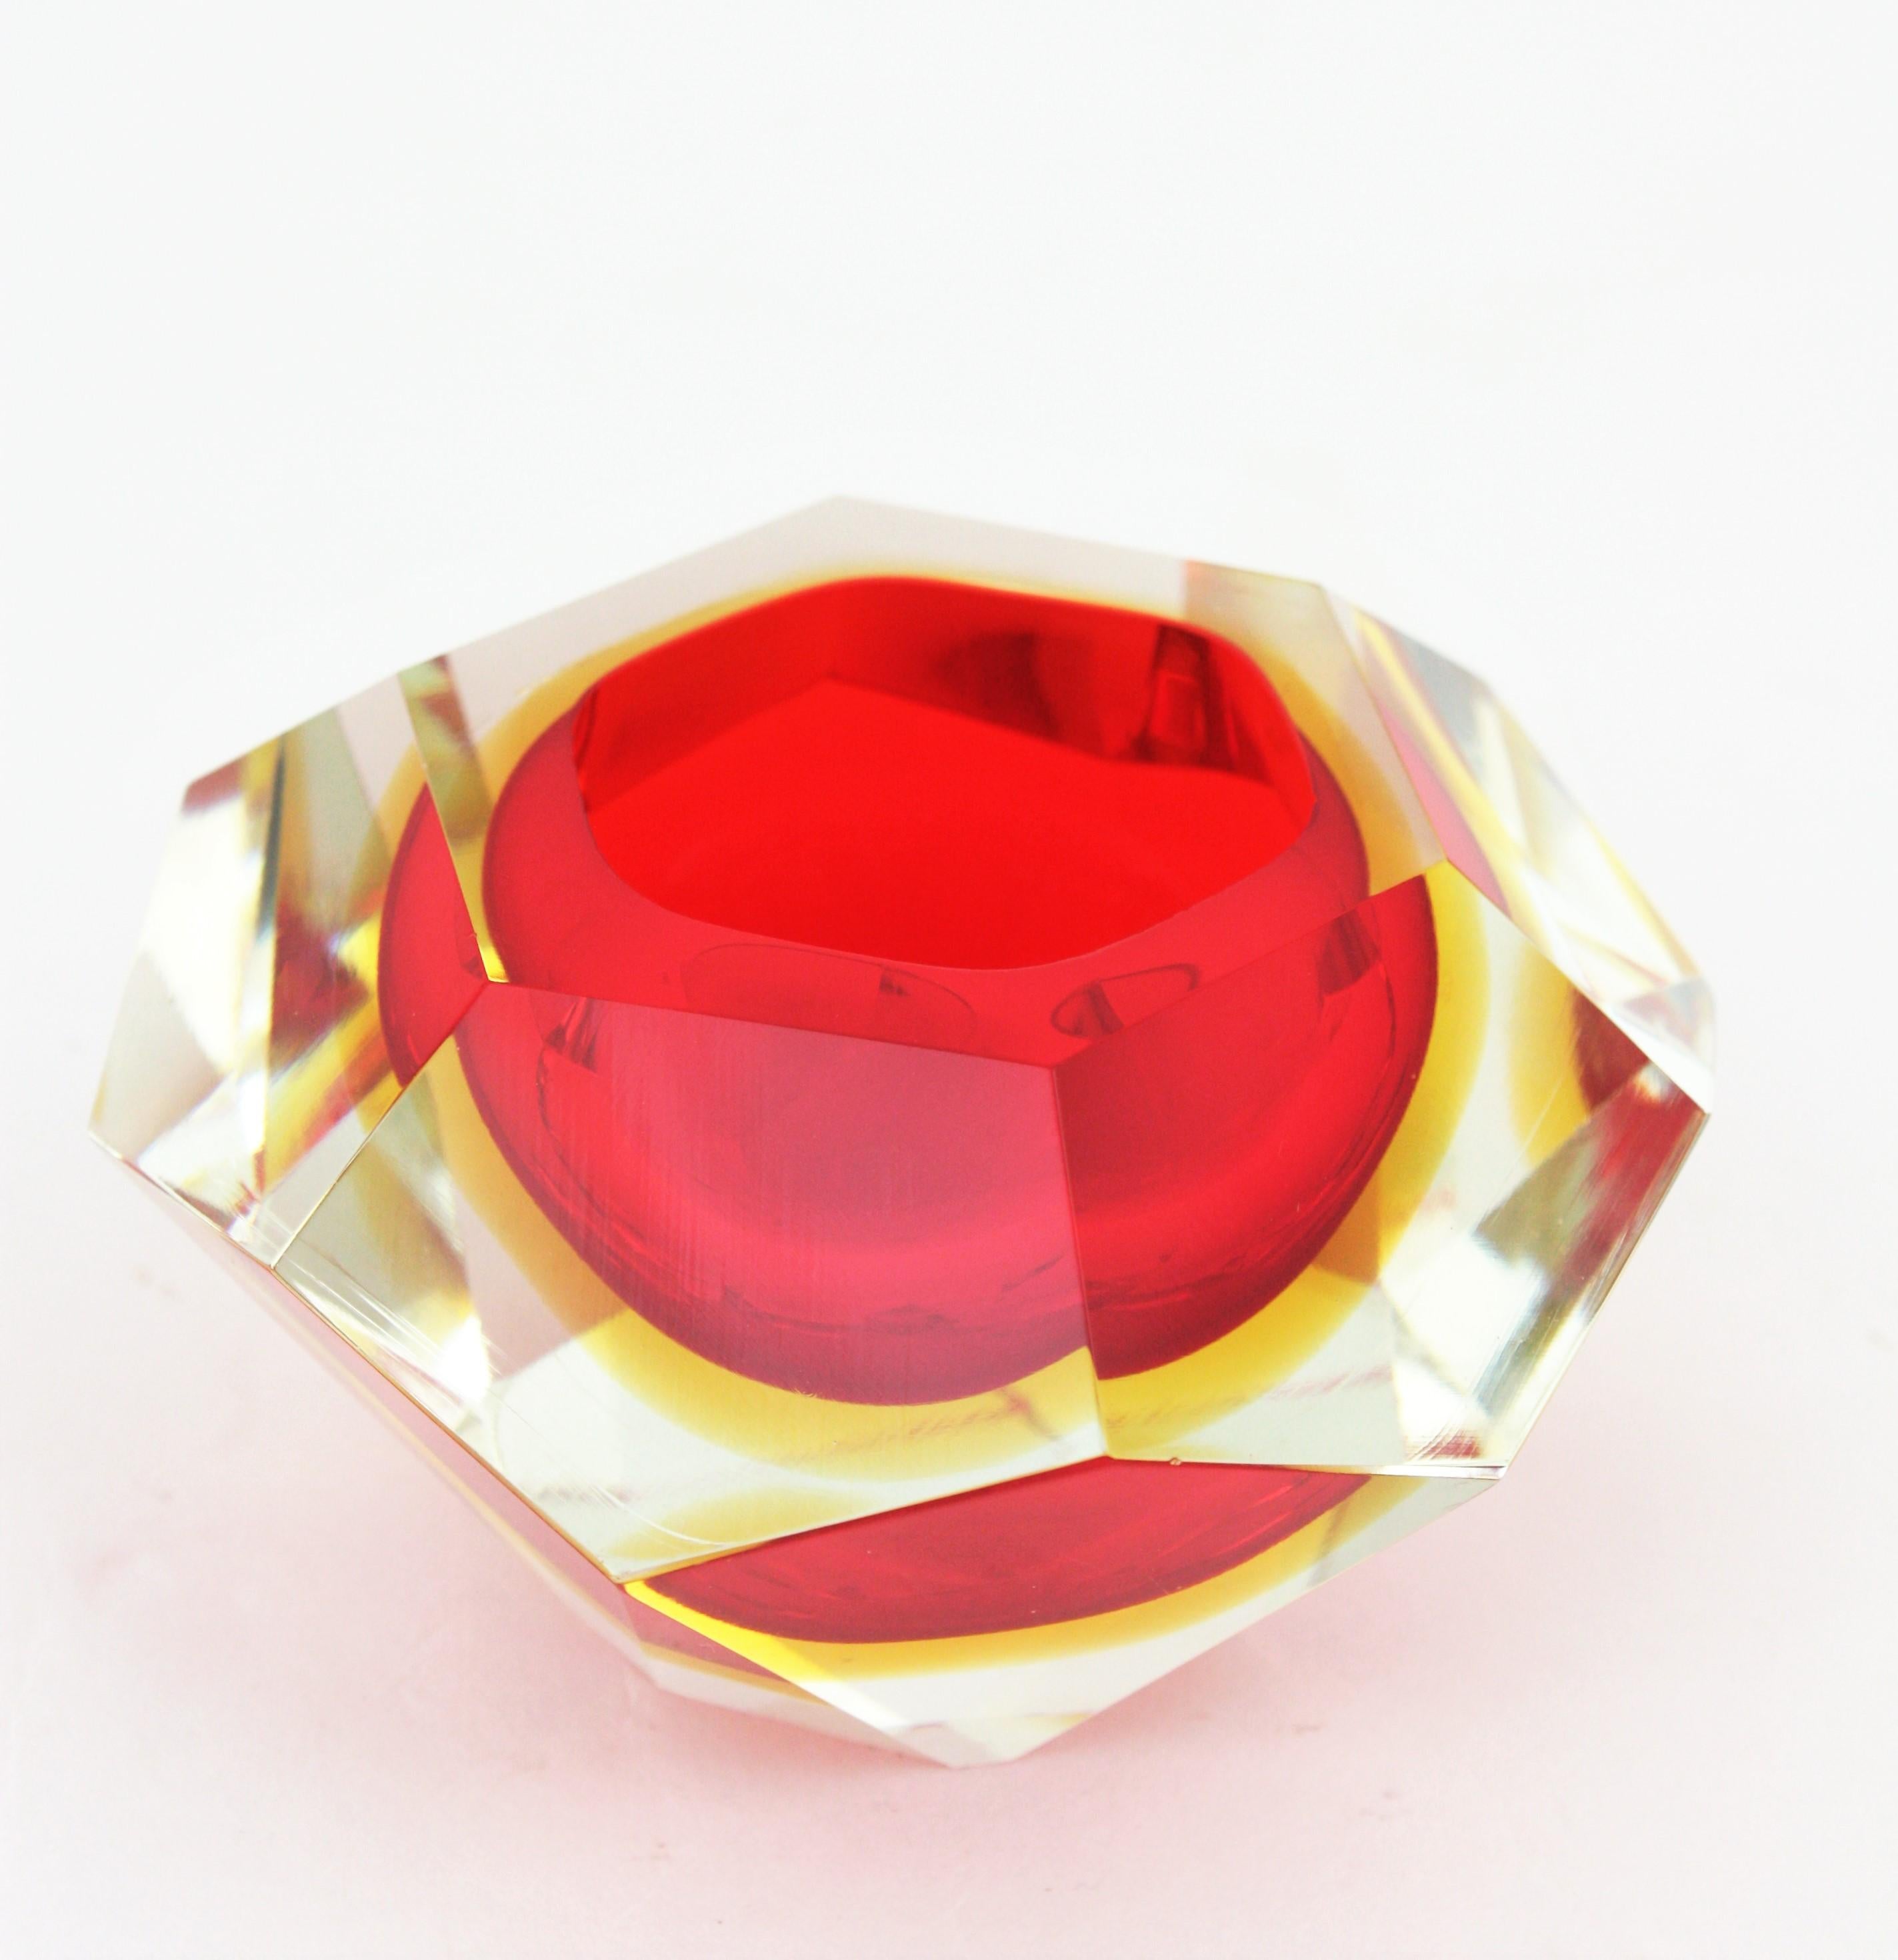 20th Century Flavio Poli Murano Red, Yellow and Clear Faceted Glass Diamond Bowl or Ashtray For Sale